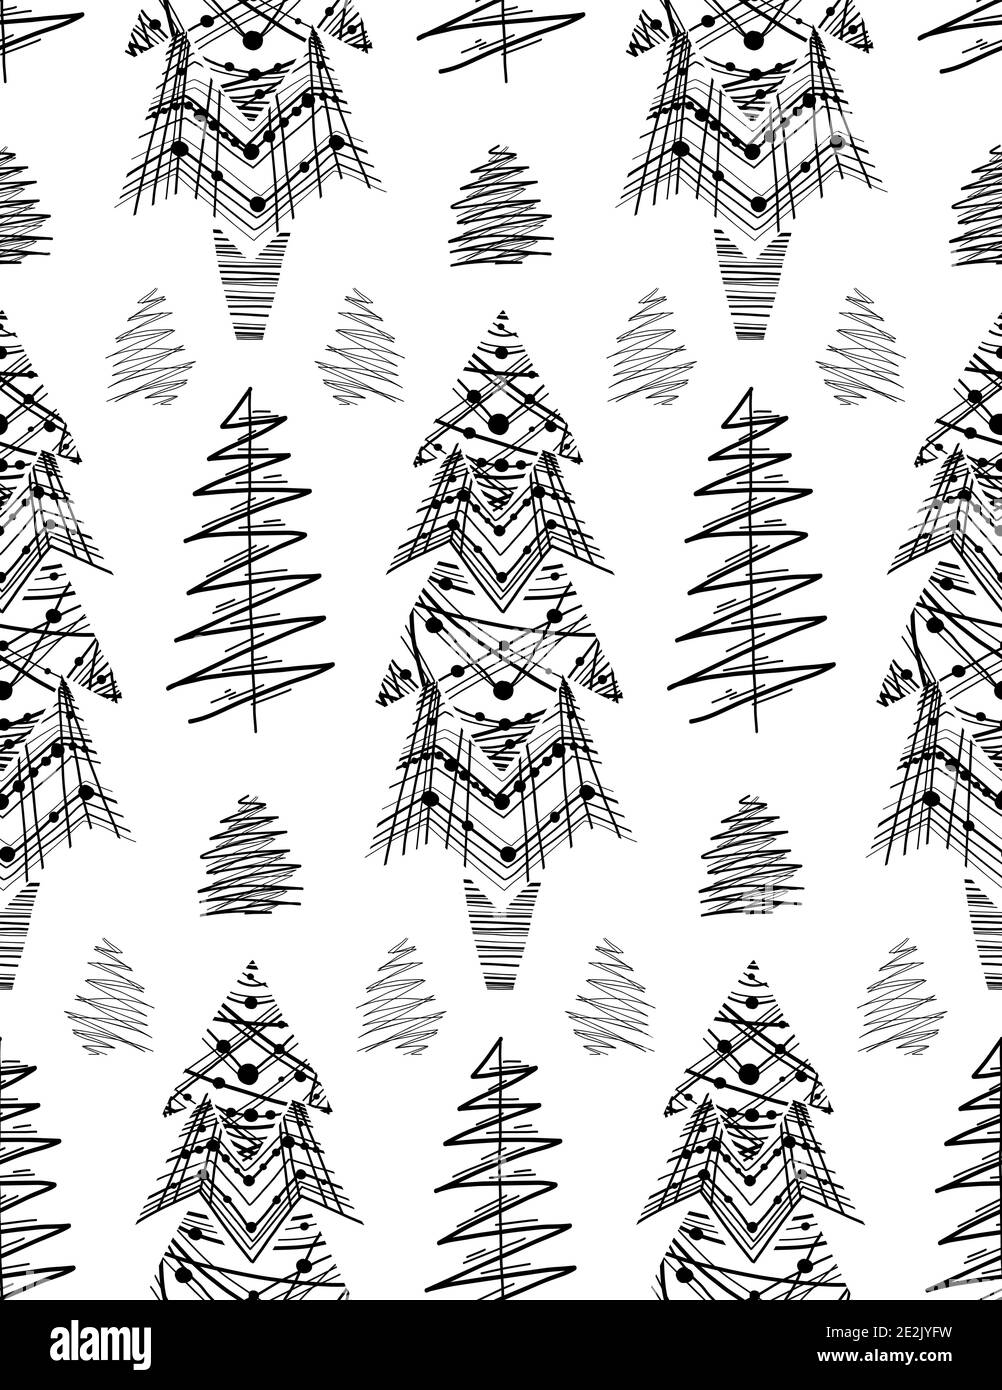 Seamless pattern of various simple lagom fir trees with hatching and strokes. Hand drawn Christmas trees. Vector festive ink texture for fabrics, wrap Stock Vector